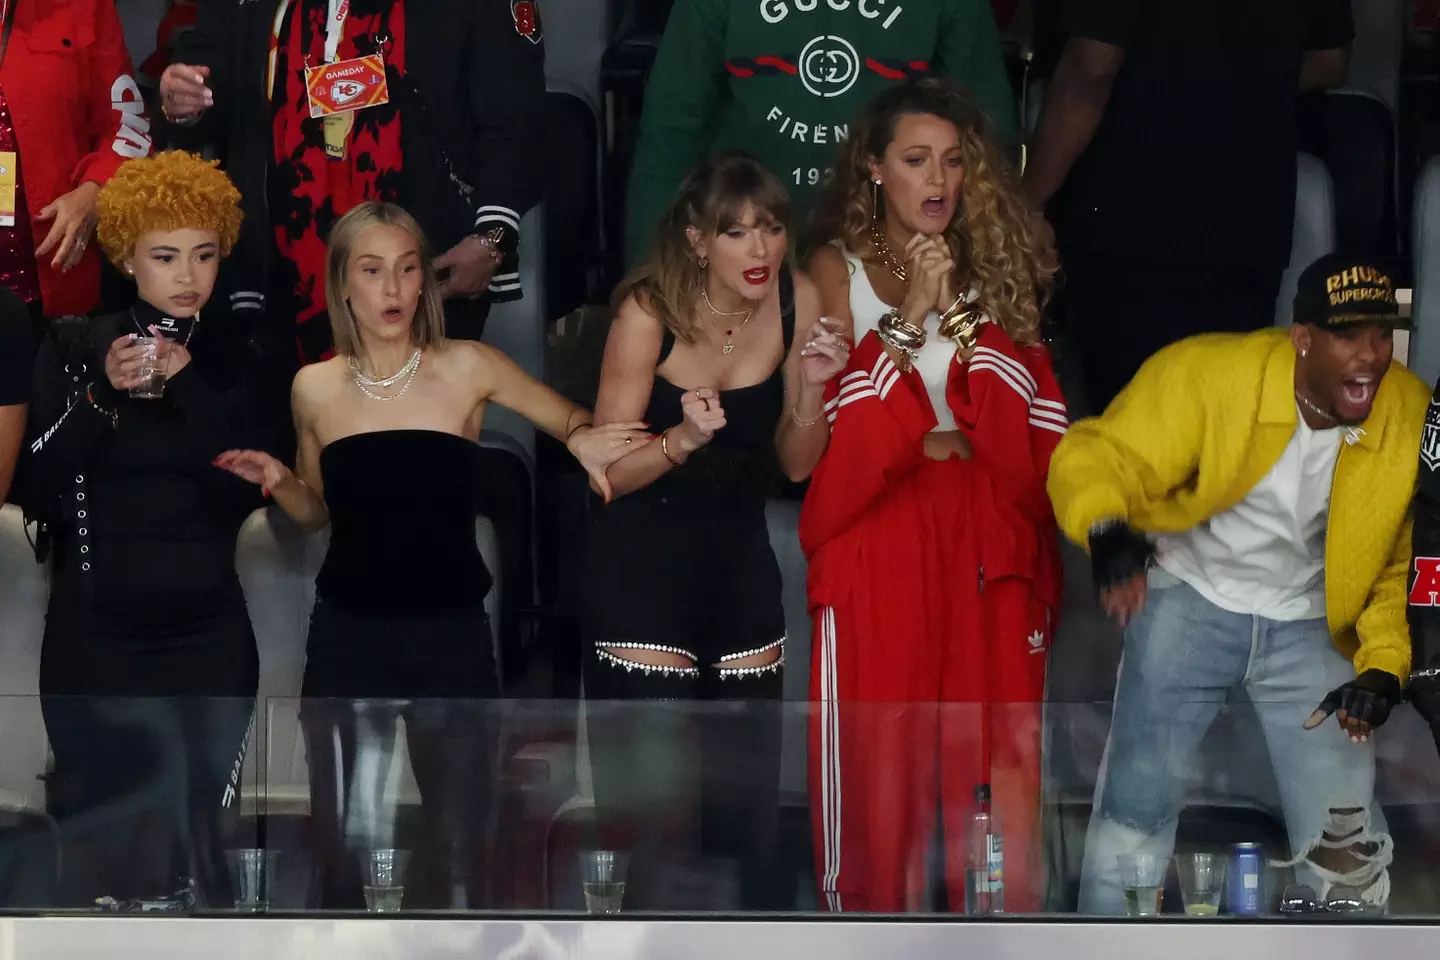 Taylor could be seen cheering on Travis from the sidelines.